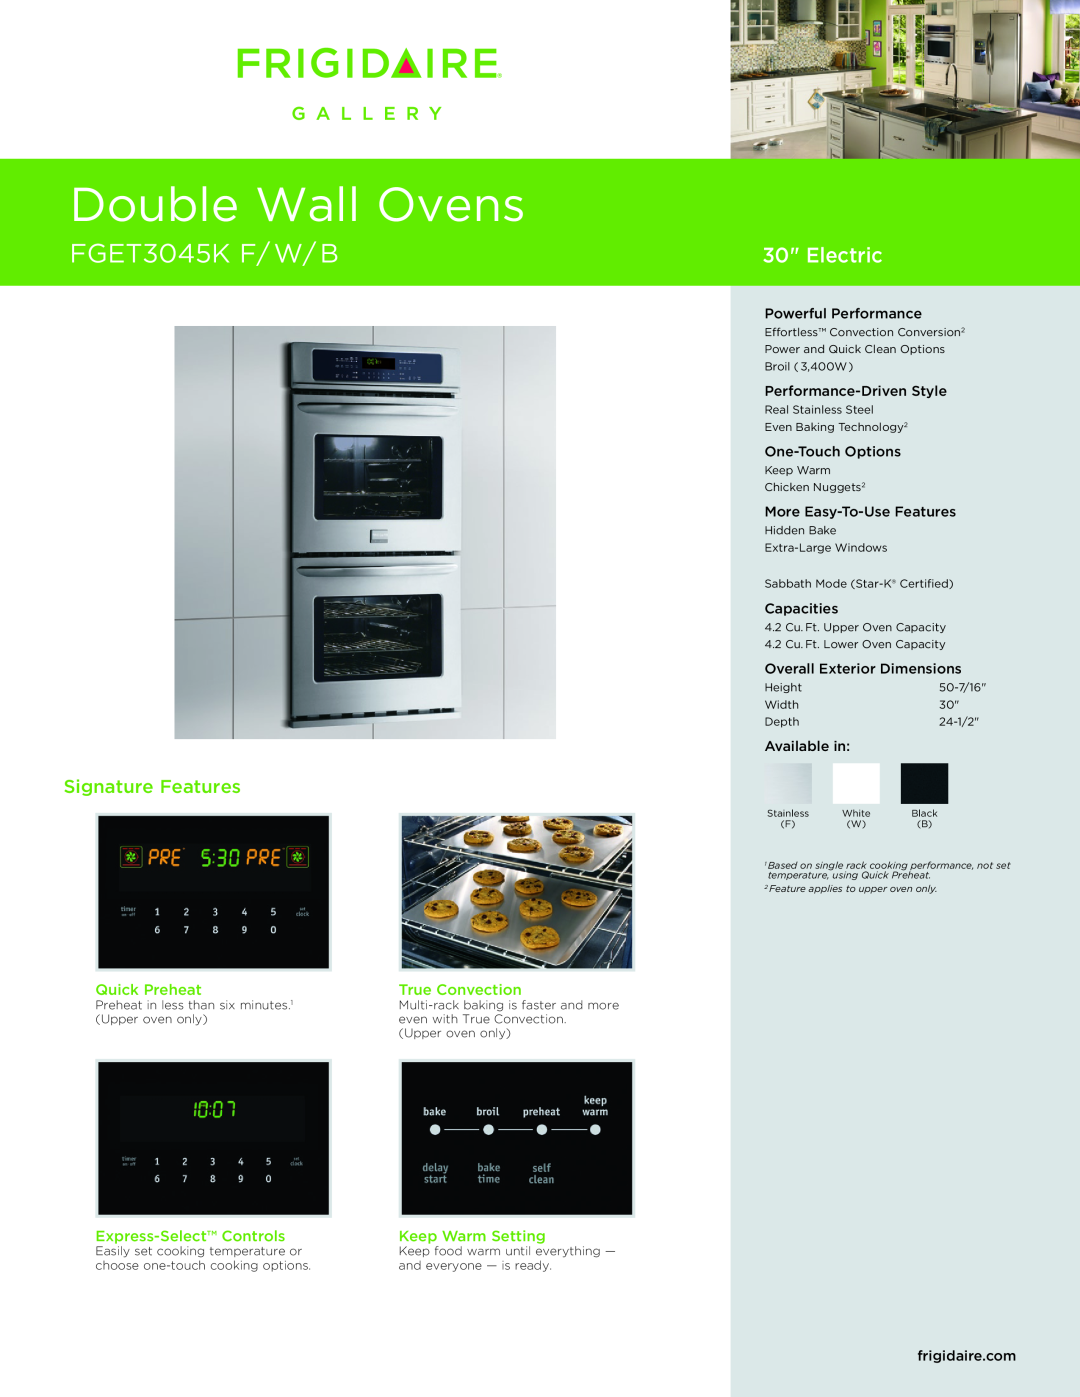 Frigidaire FGET3045KB dimensions Powerful Performance, Performance-DrivenStyle, One-TouchOptions, More Easy-To-UseFeatures 